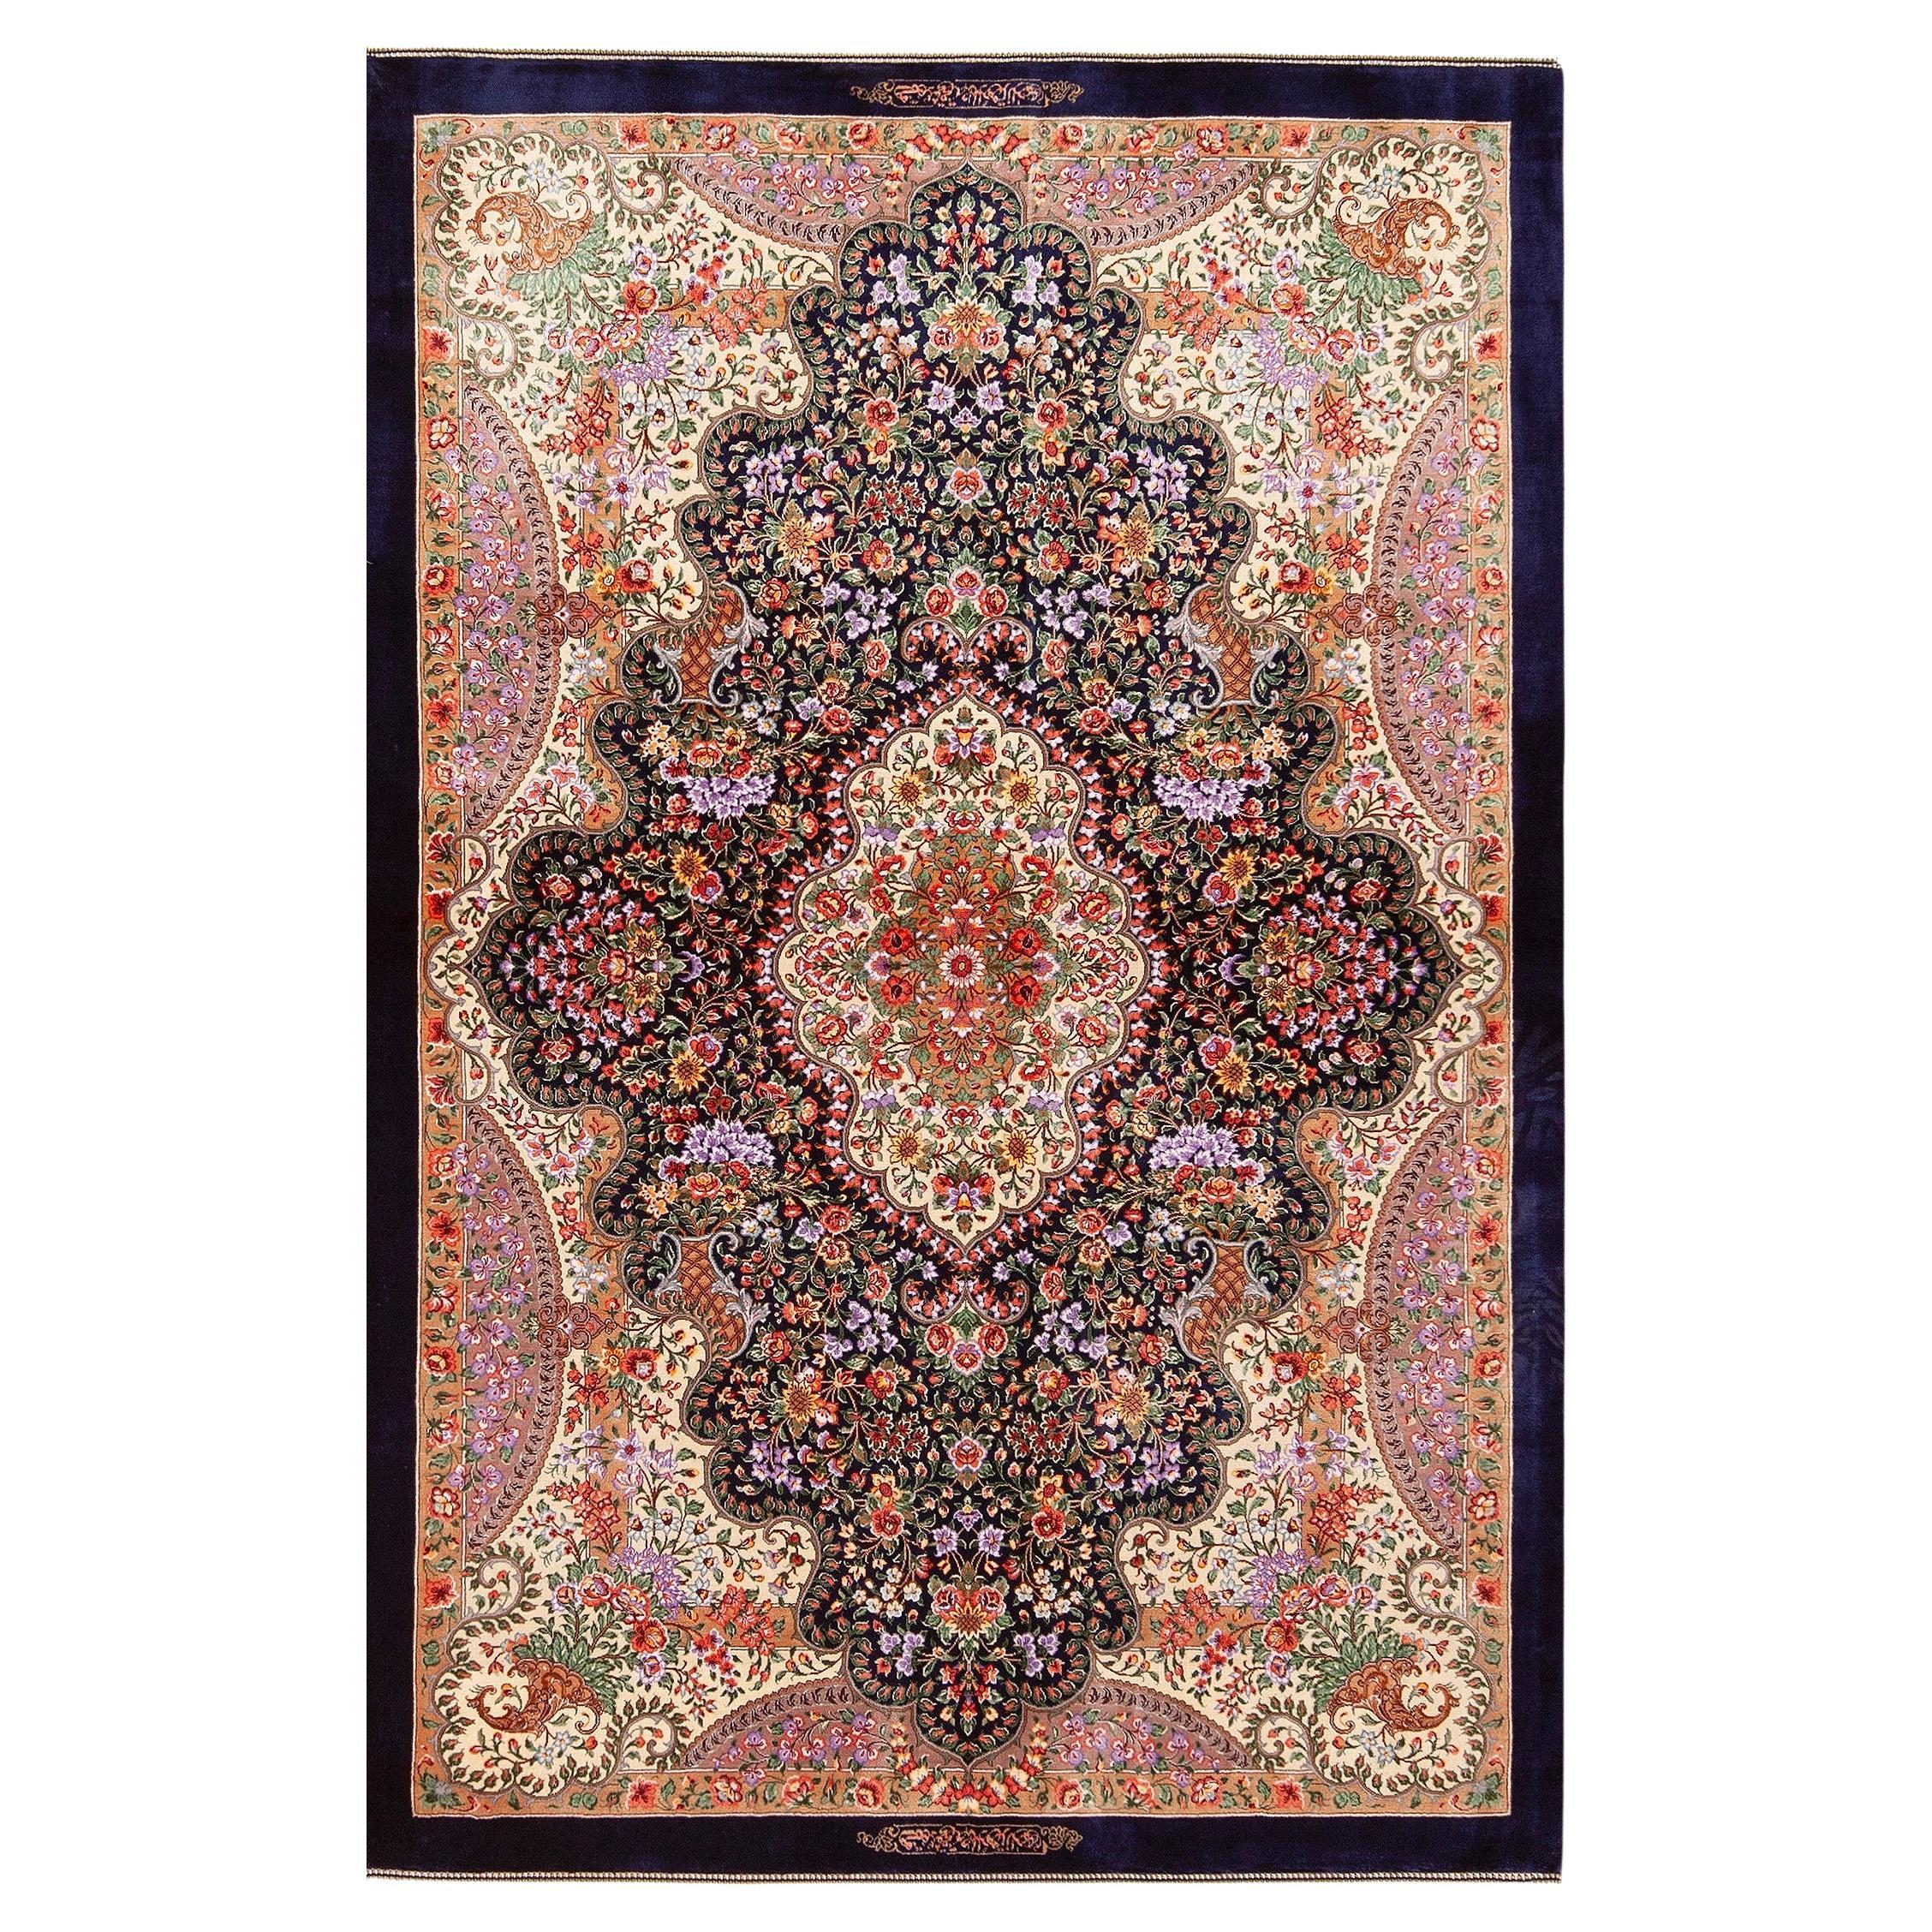 Luxurious Fine Small Size Vintage Floral Persian Silk Qum Rug 3'6" x 5' For Sale